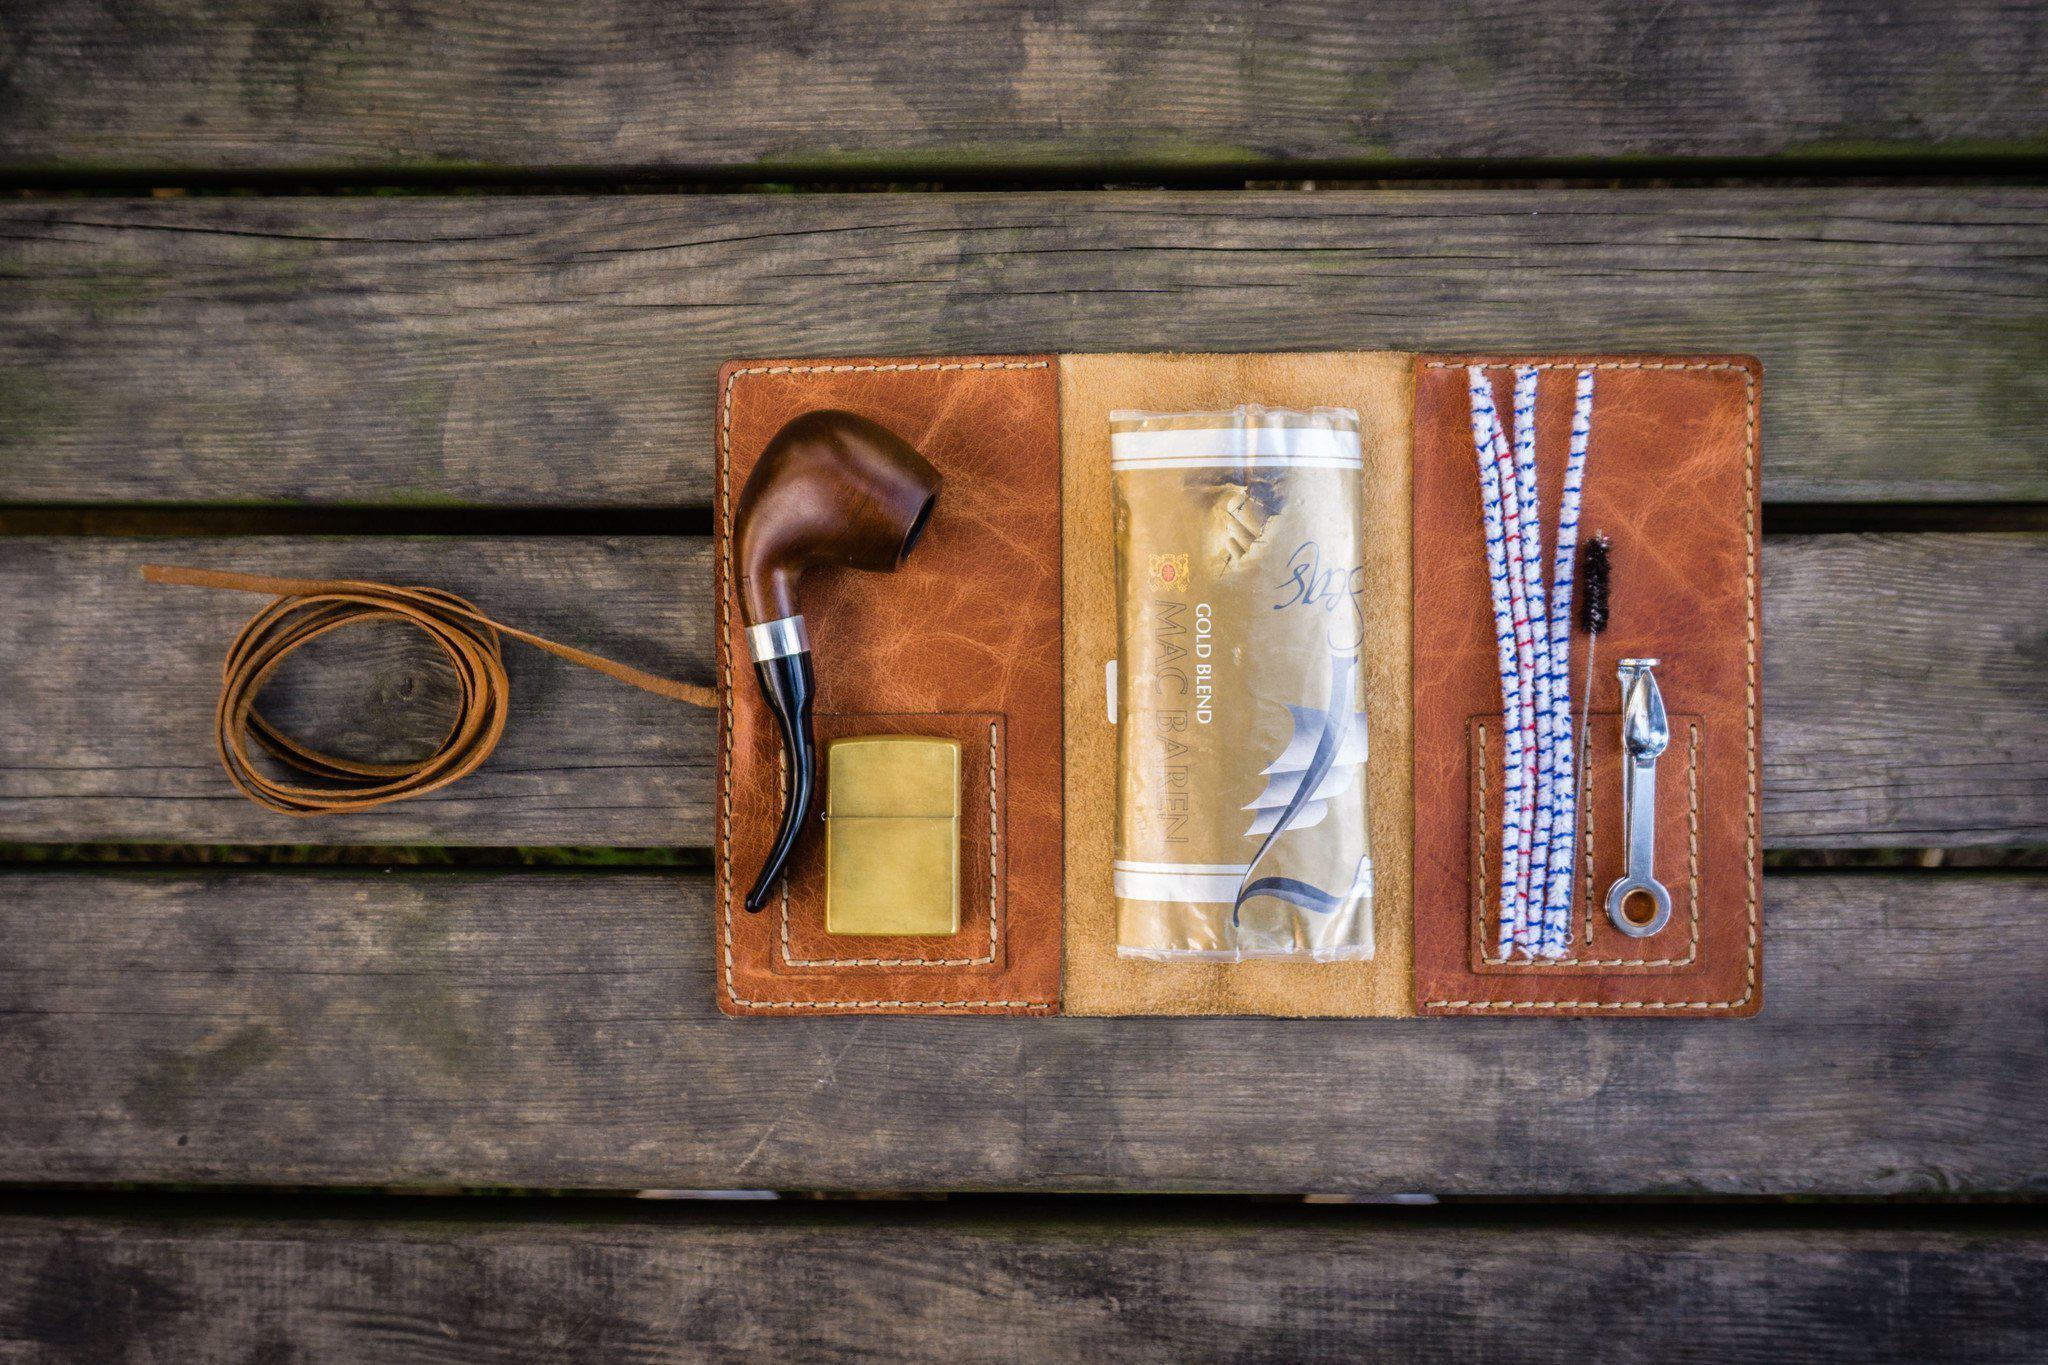 Tobacco pouch for a pipe and tobacco